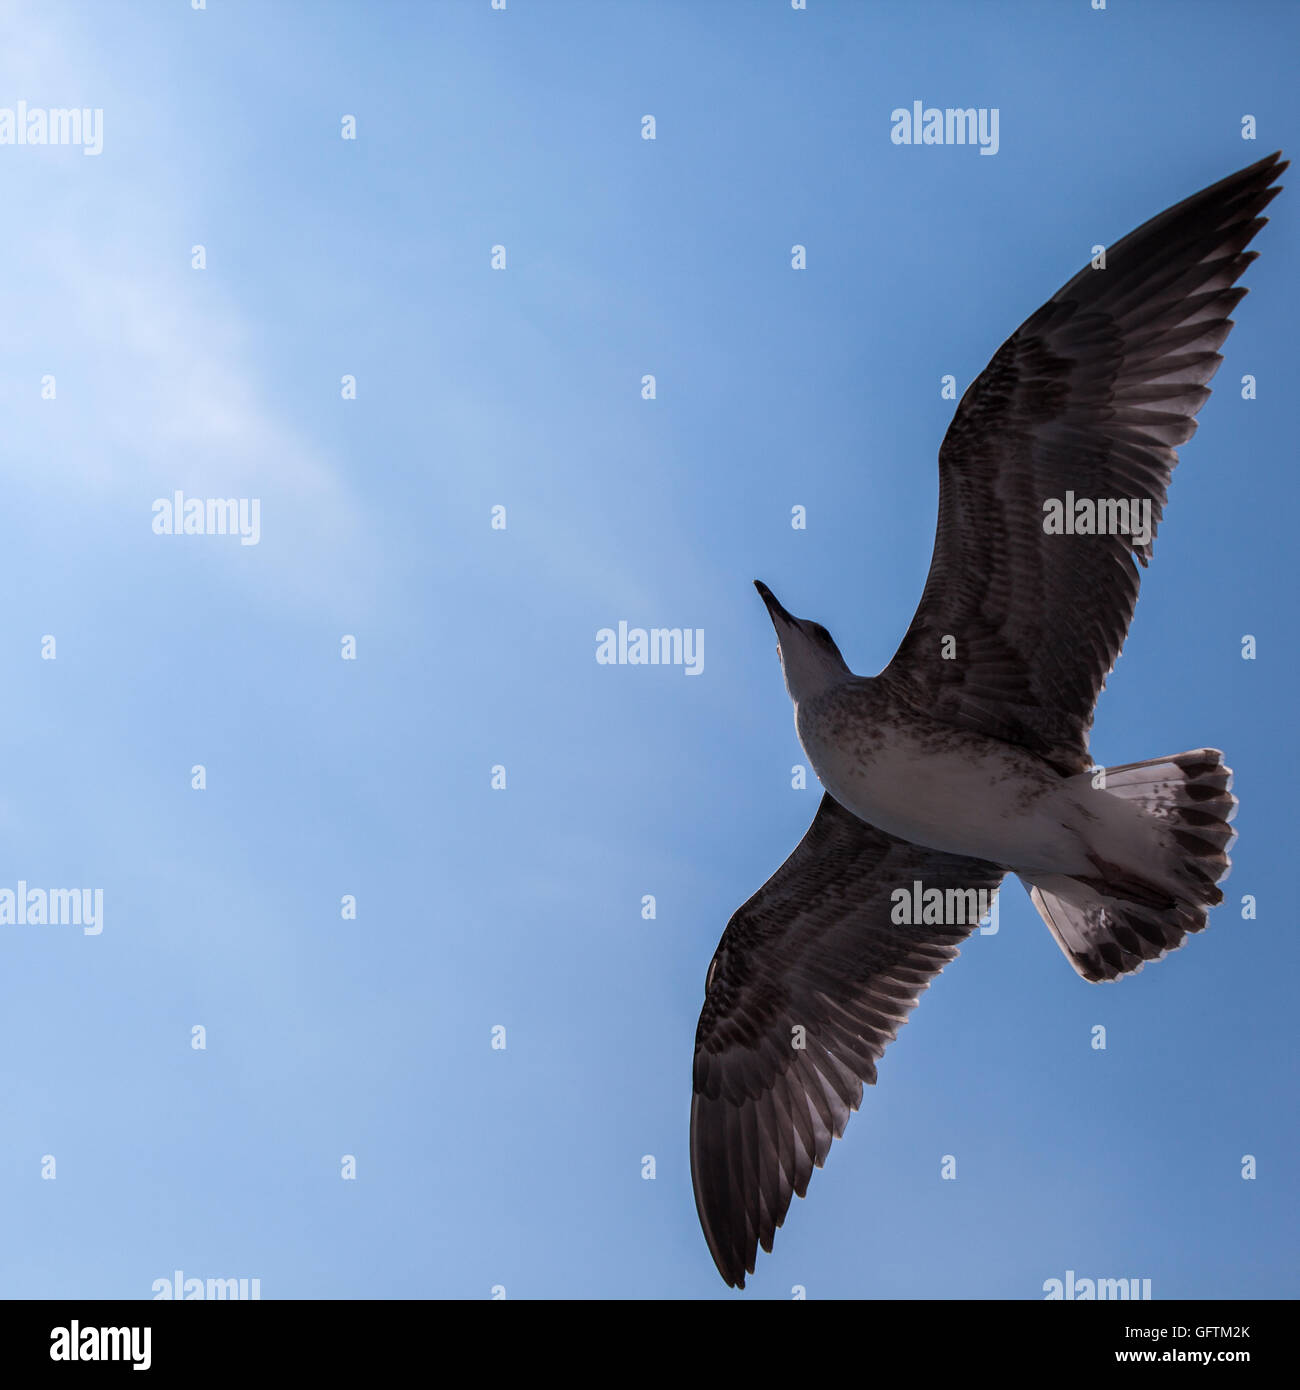 Gull Flying in sky Banque D'Images